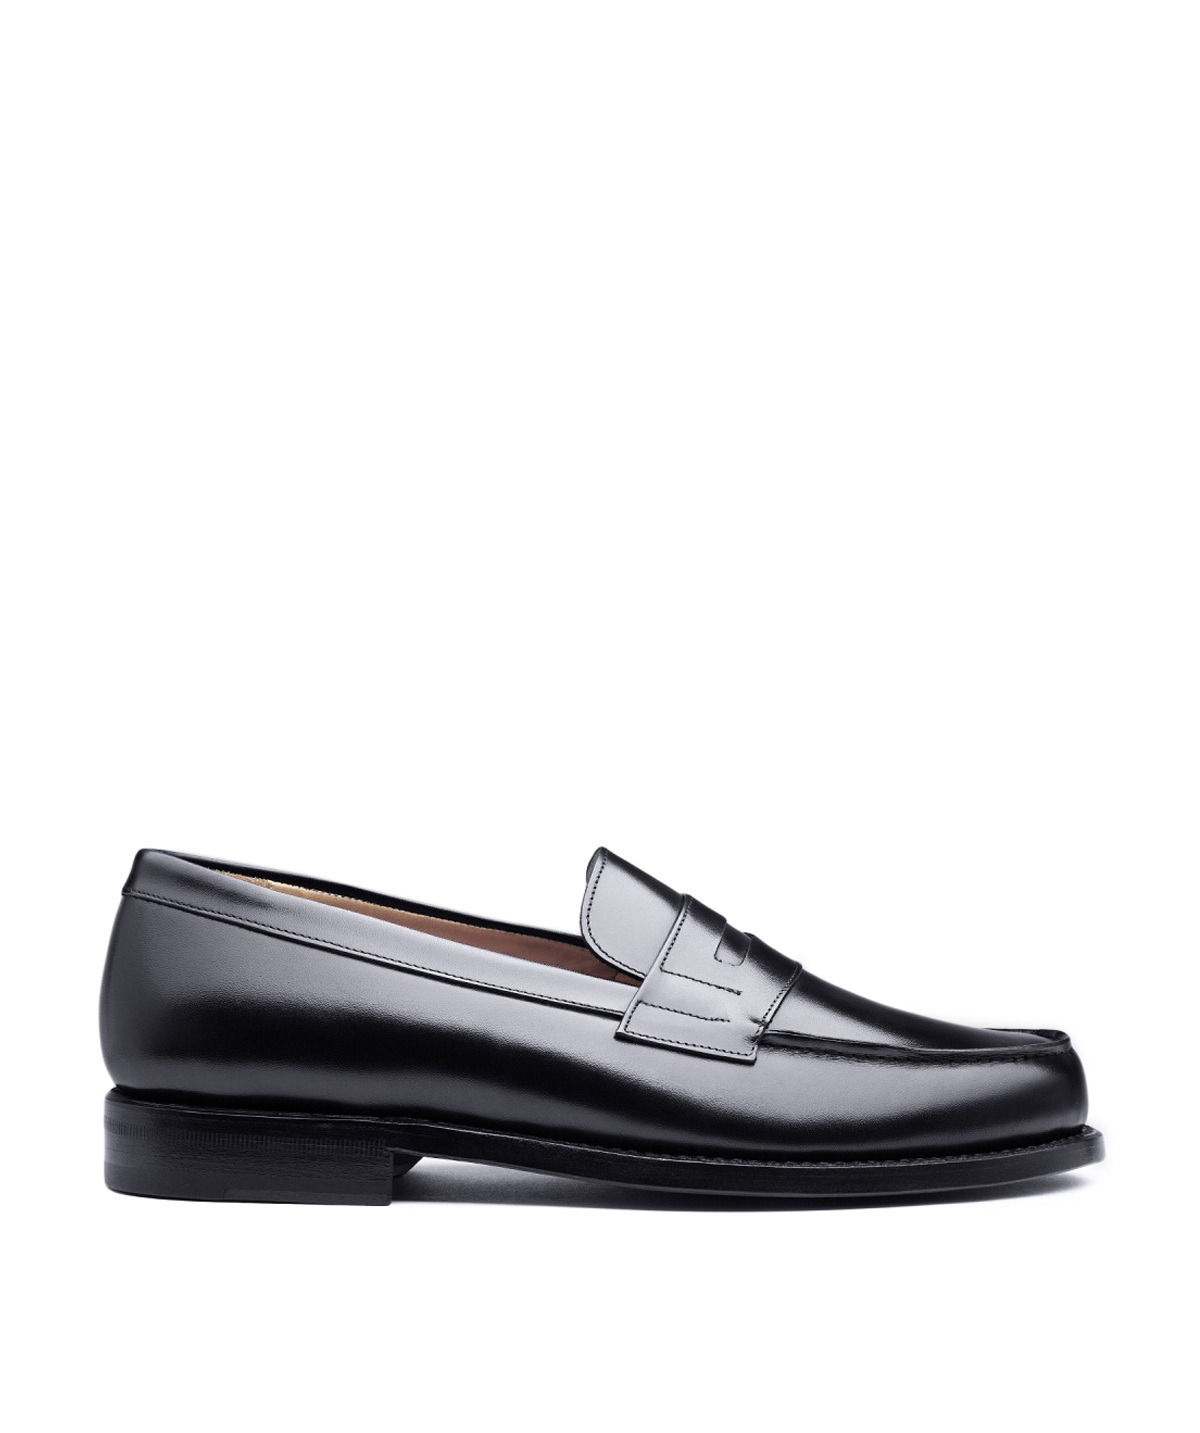 Loafers COLLEGE 1986 Black